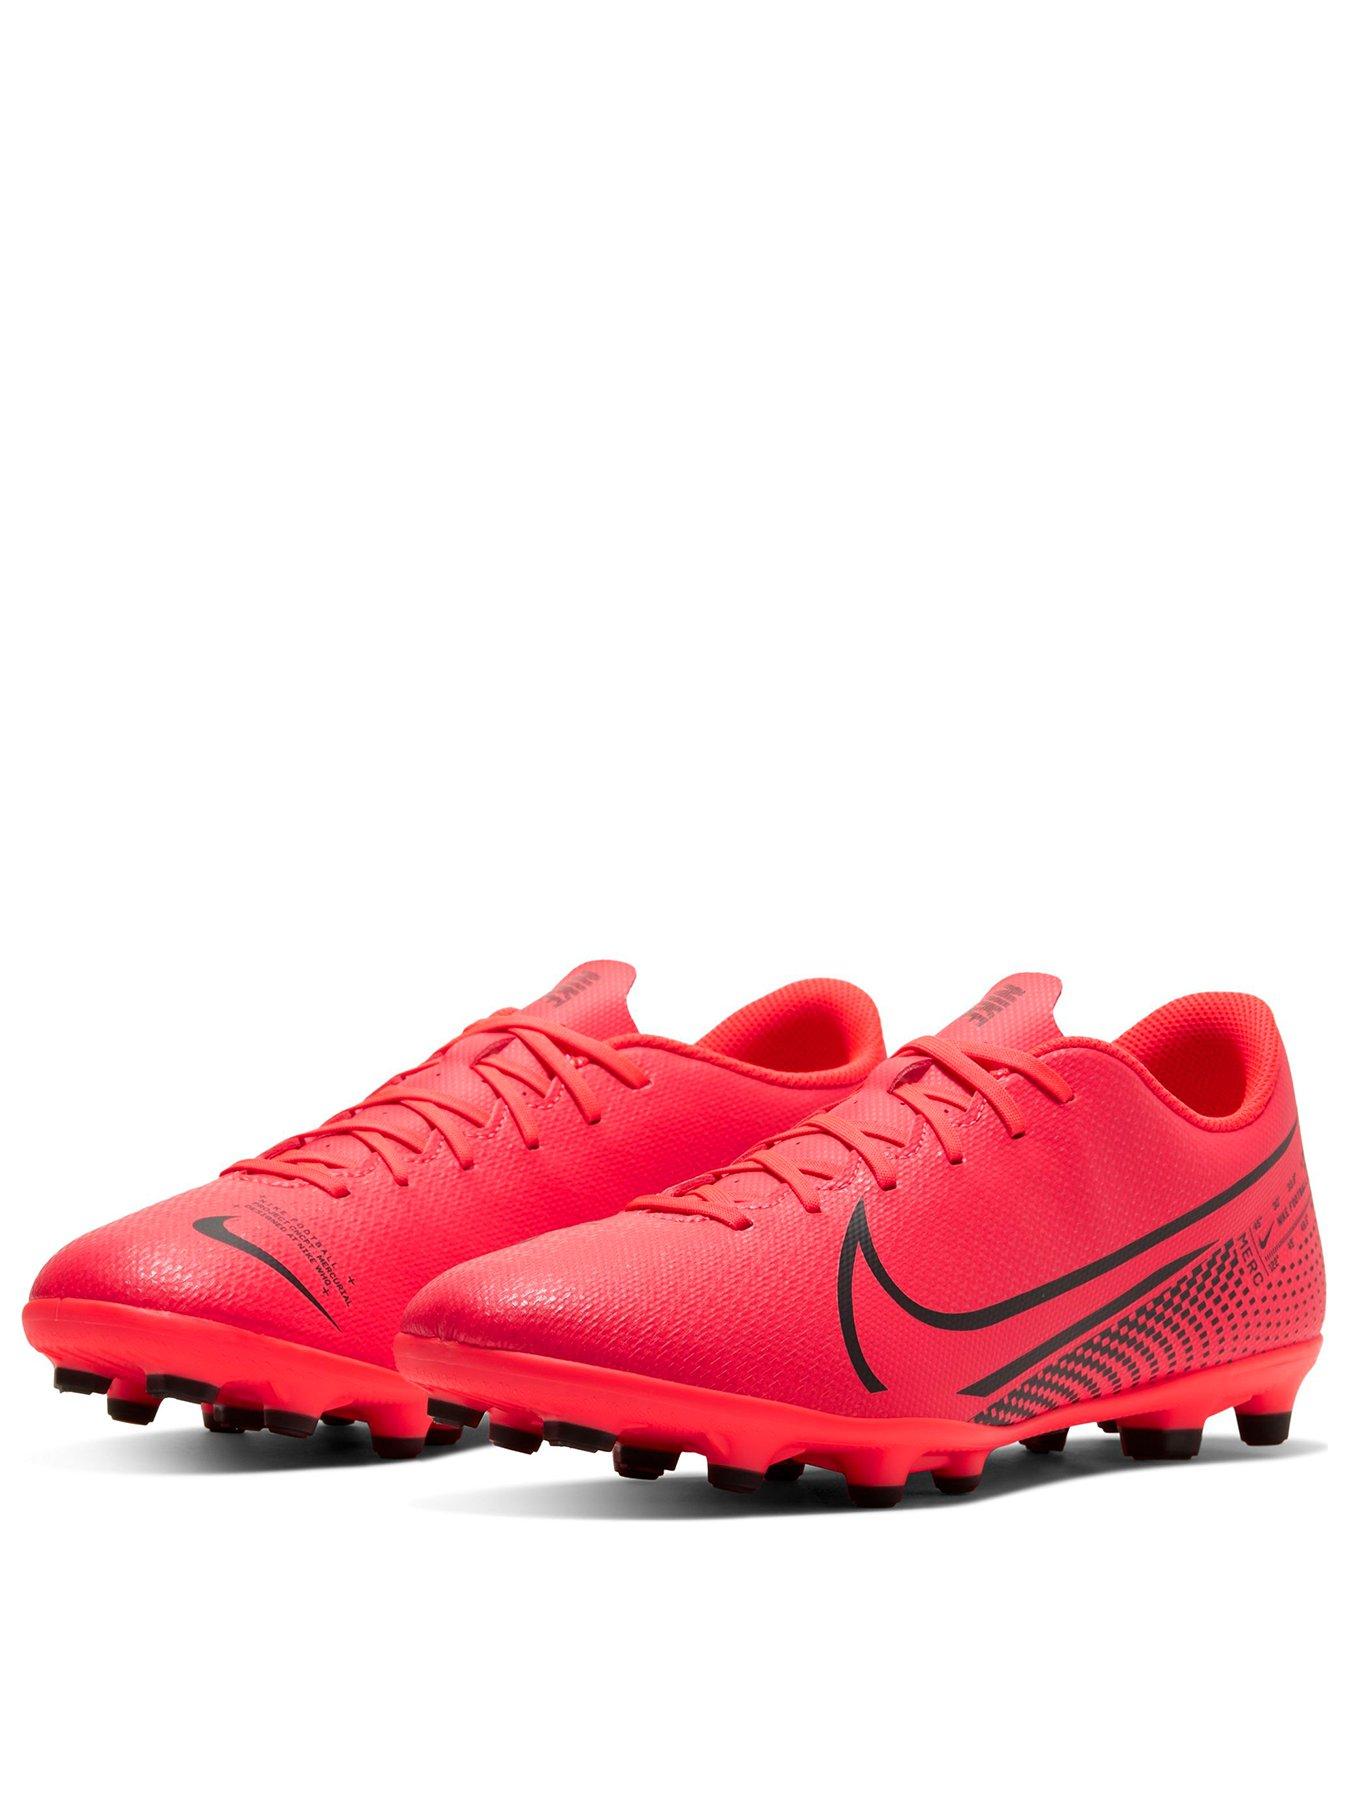 red nike football boots 